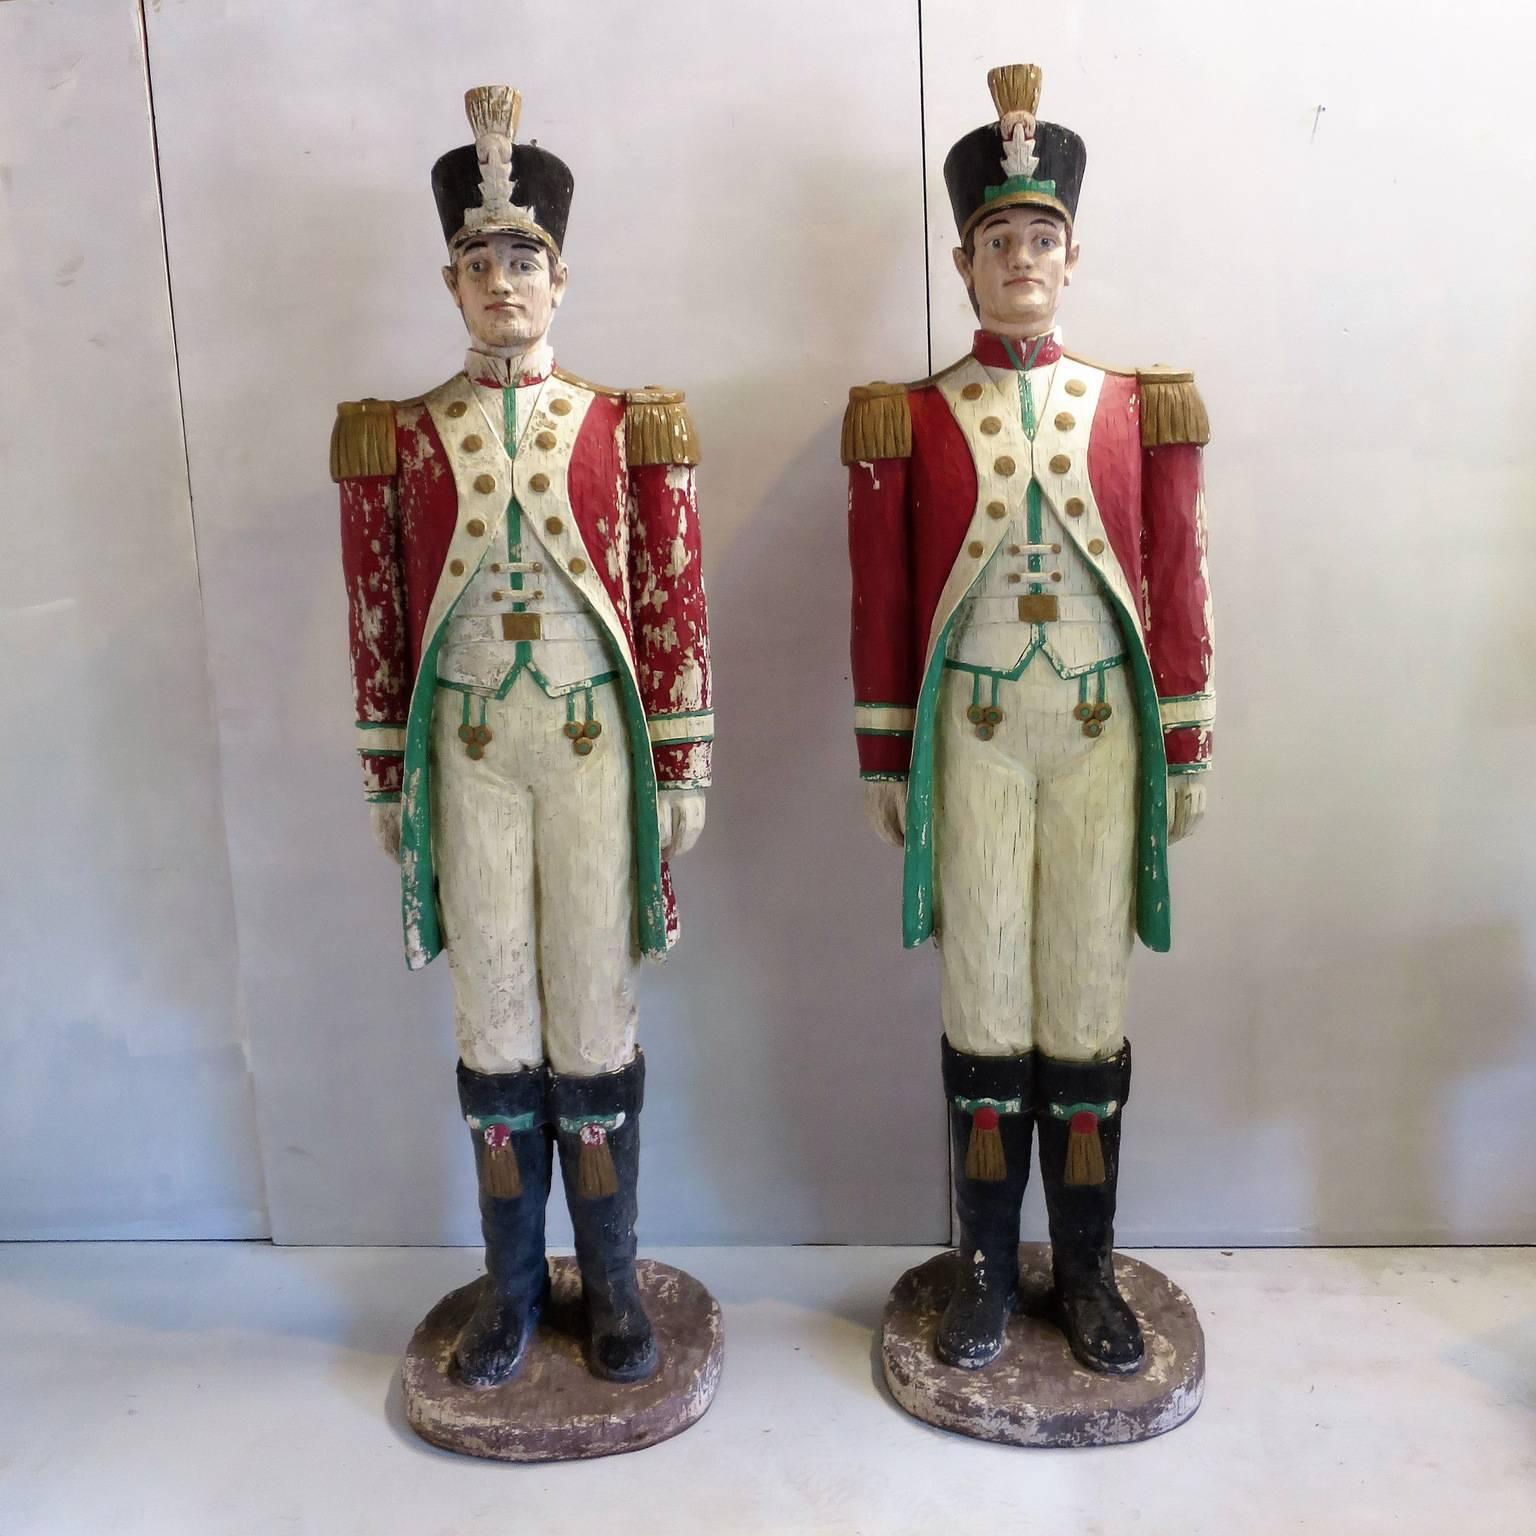 Pair of Handsome Lifesize Military Guards in Uniform Midcentury Sculptures 2